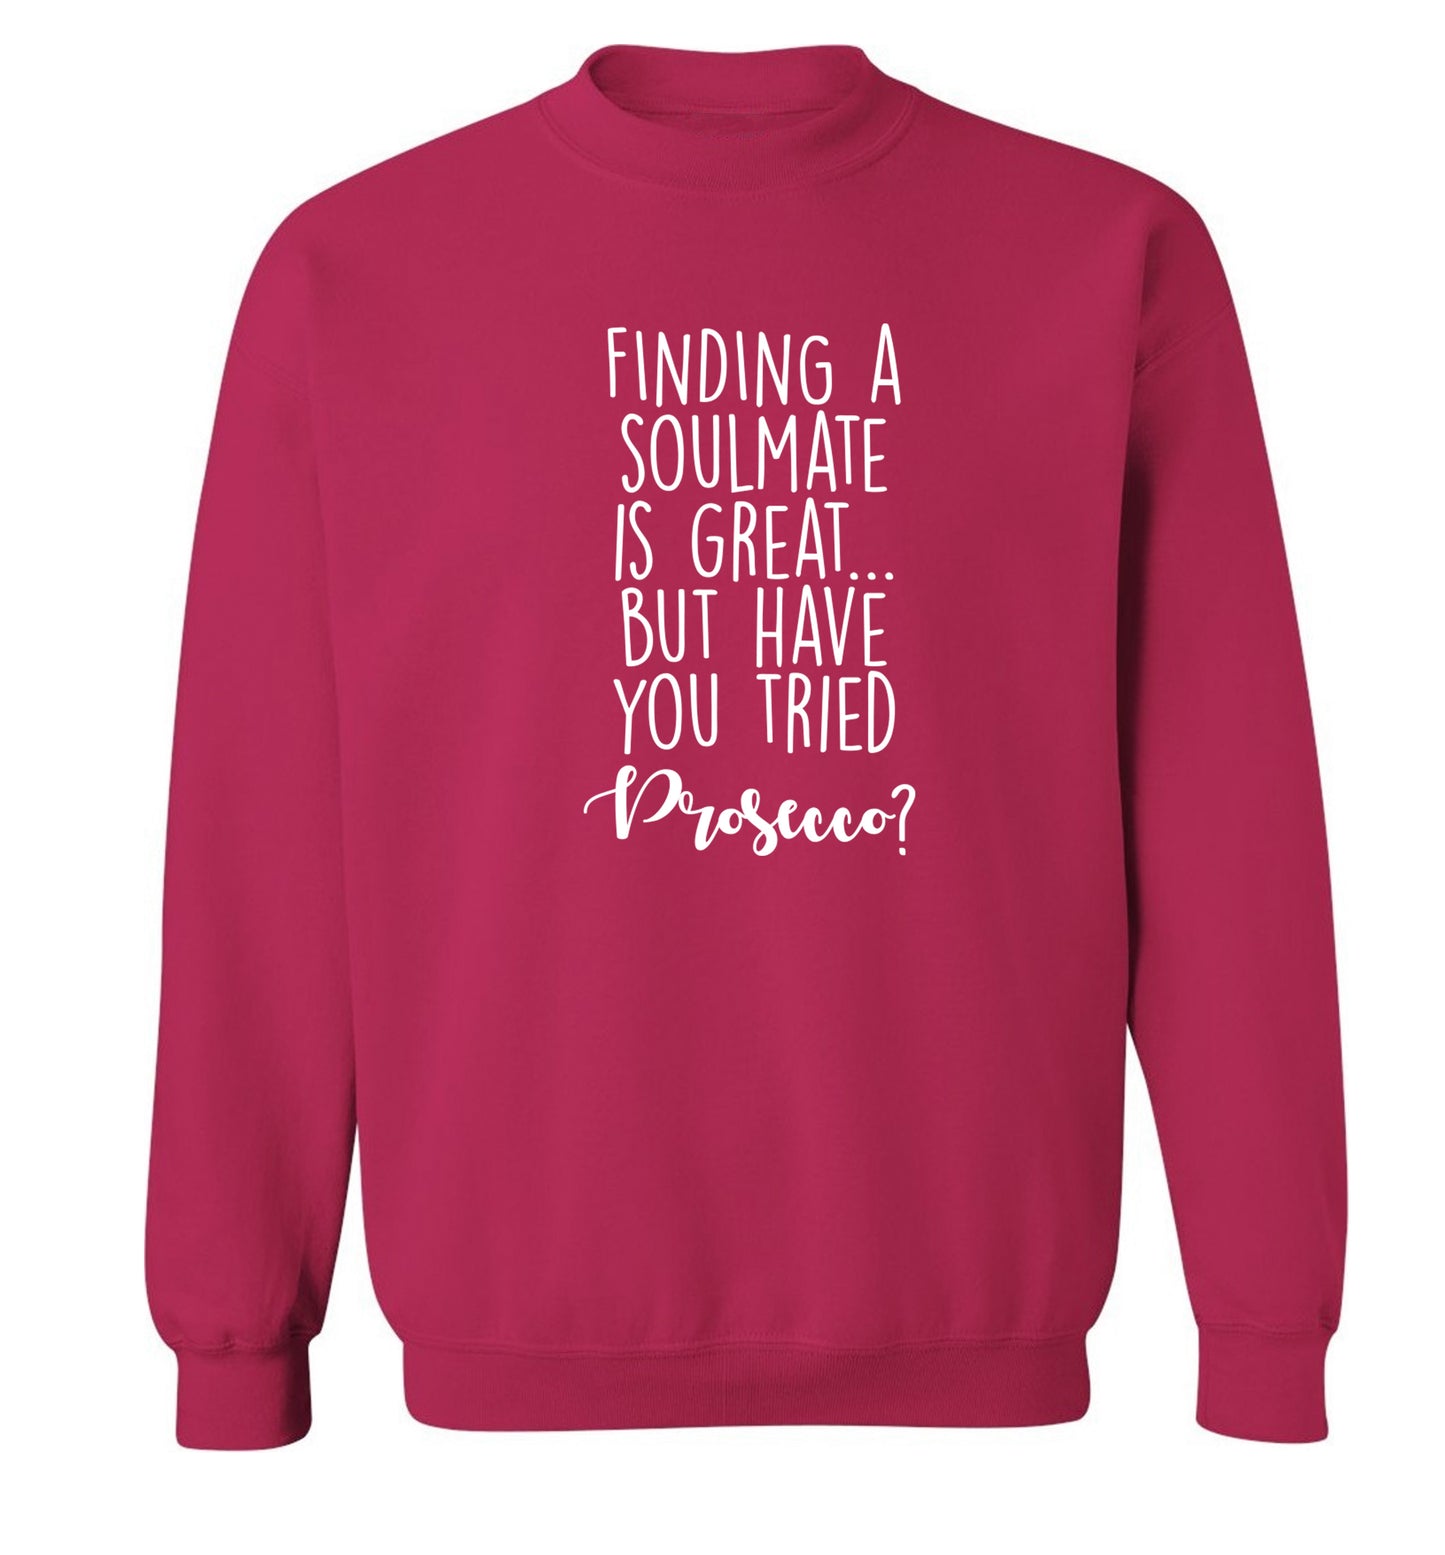 Finding a soulmate is great but have you tried prosecco? Adult's unisex pink Sweater 2XL